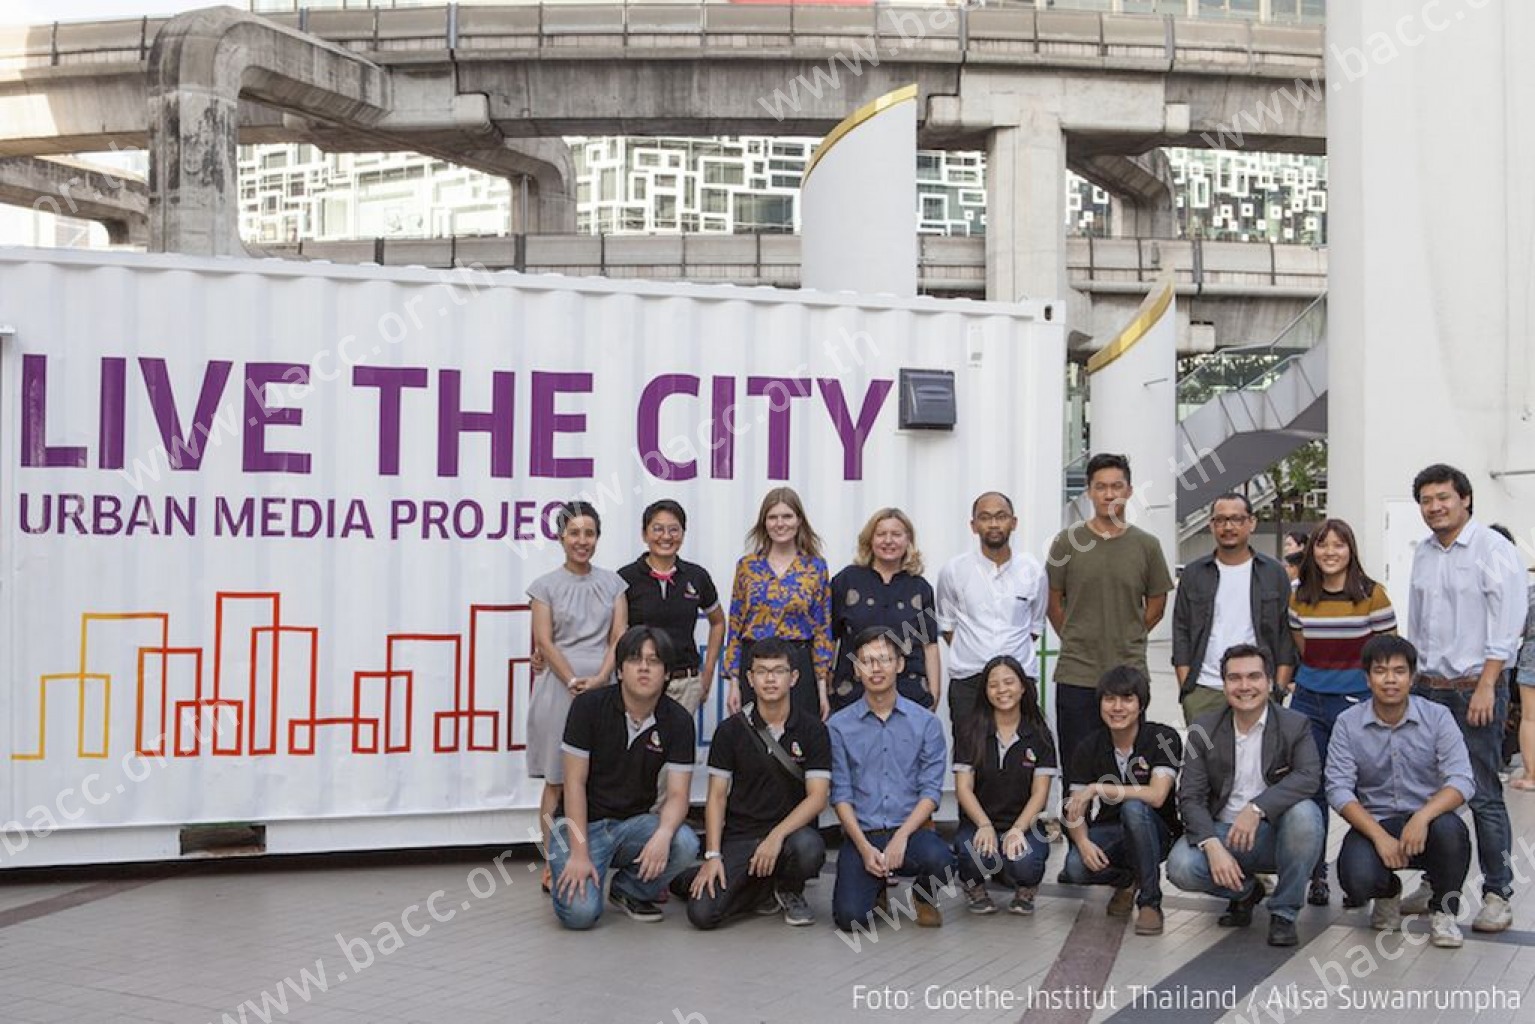 LIVE THE CITY URBAN MEDIA PROJECT